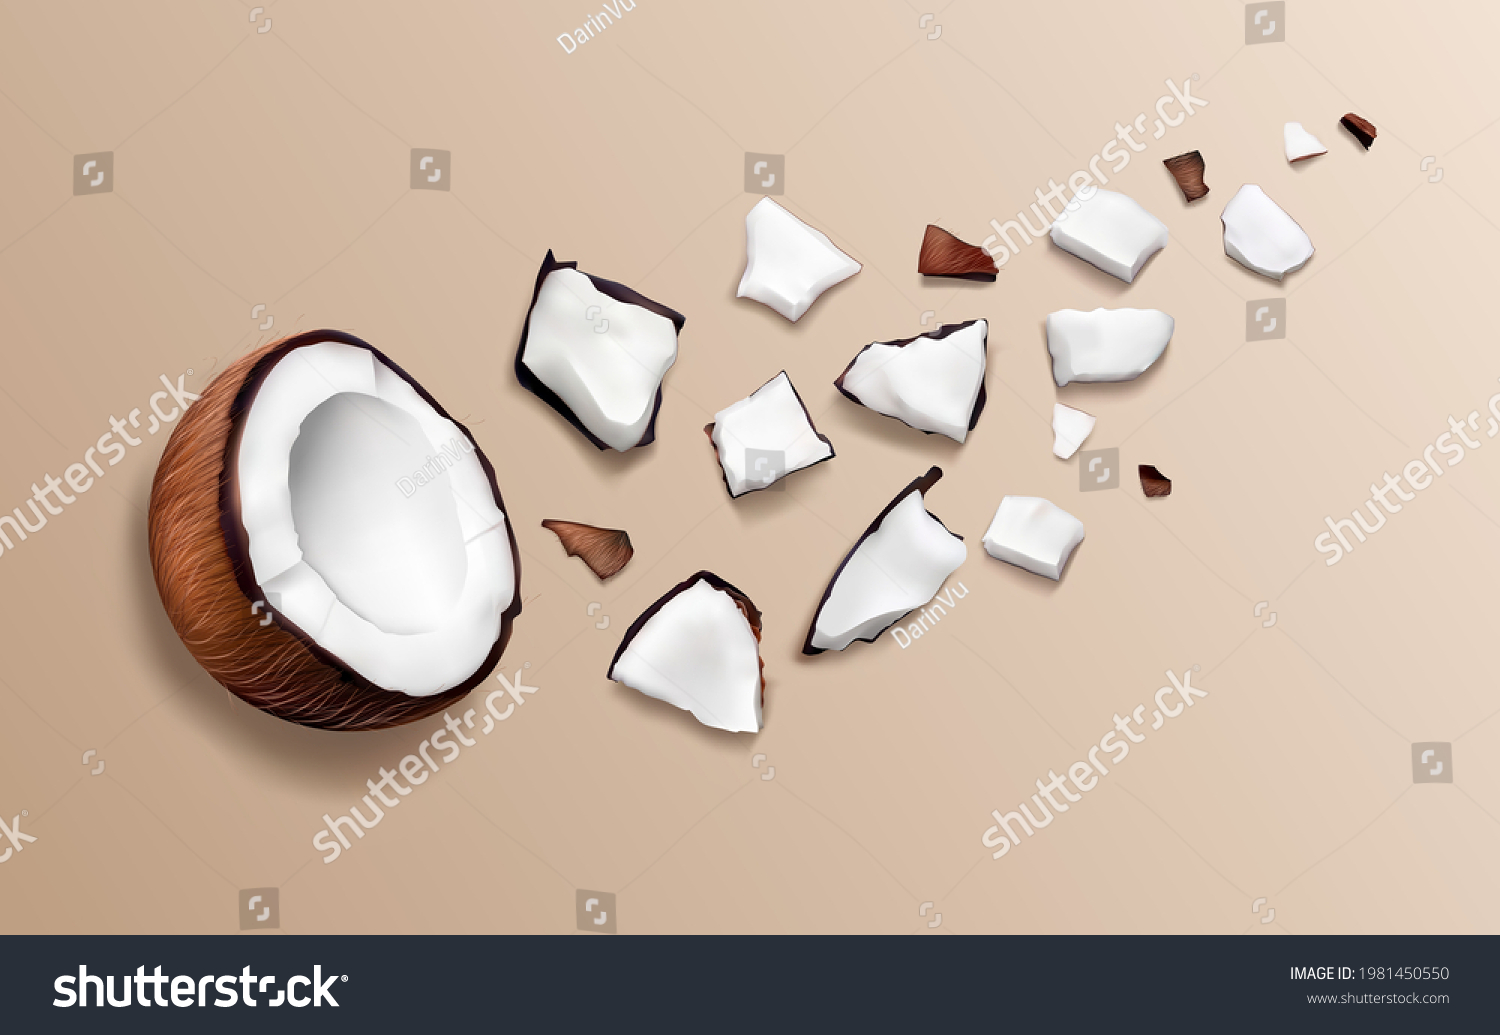 SVG of 3d realistic cracked coconut vector illustration. Juicy parts, slices of coconut. Top view. Broken into pieces on the table. Cosmetic products. Tropical abc tract on biege background. Spaa, vegan, bio svg